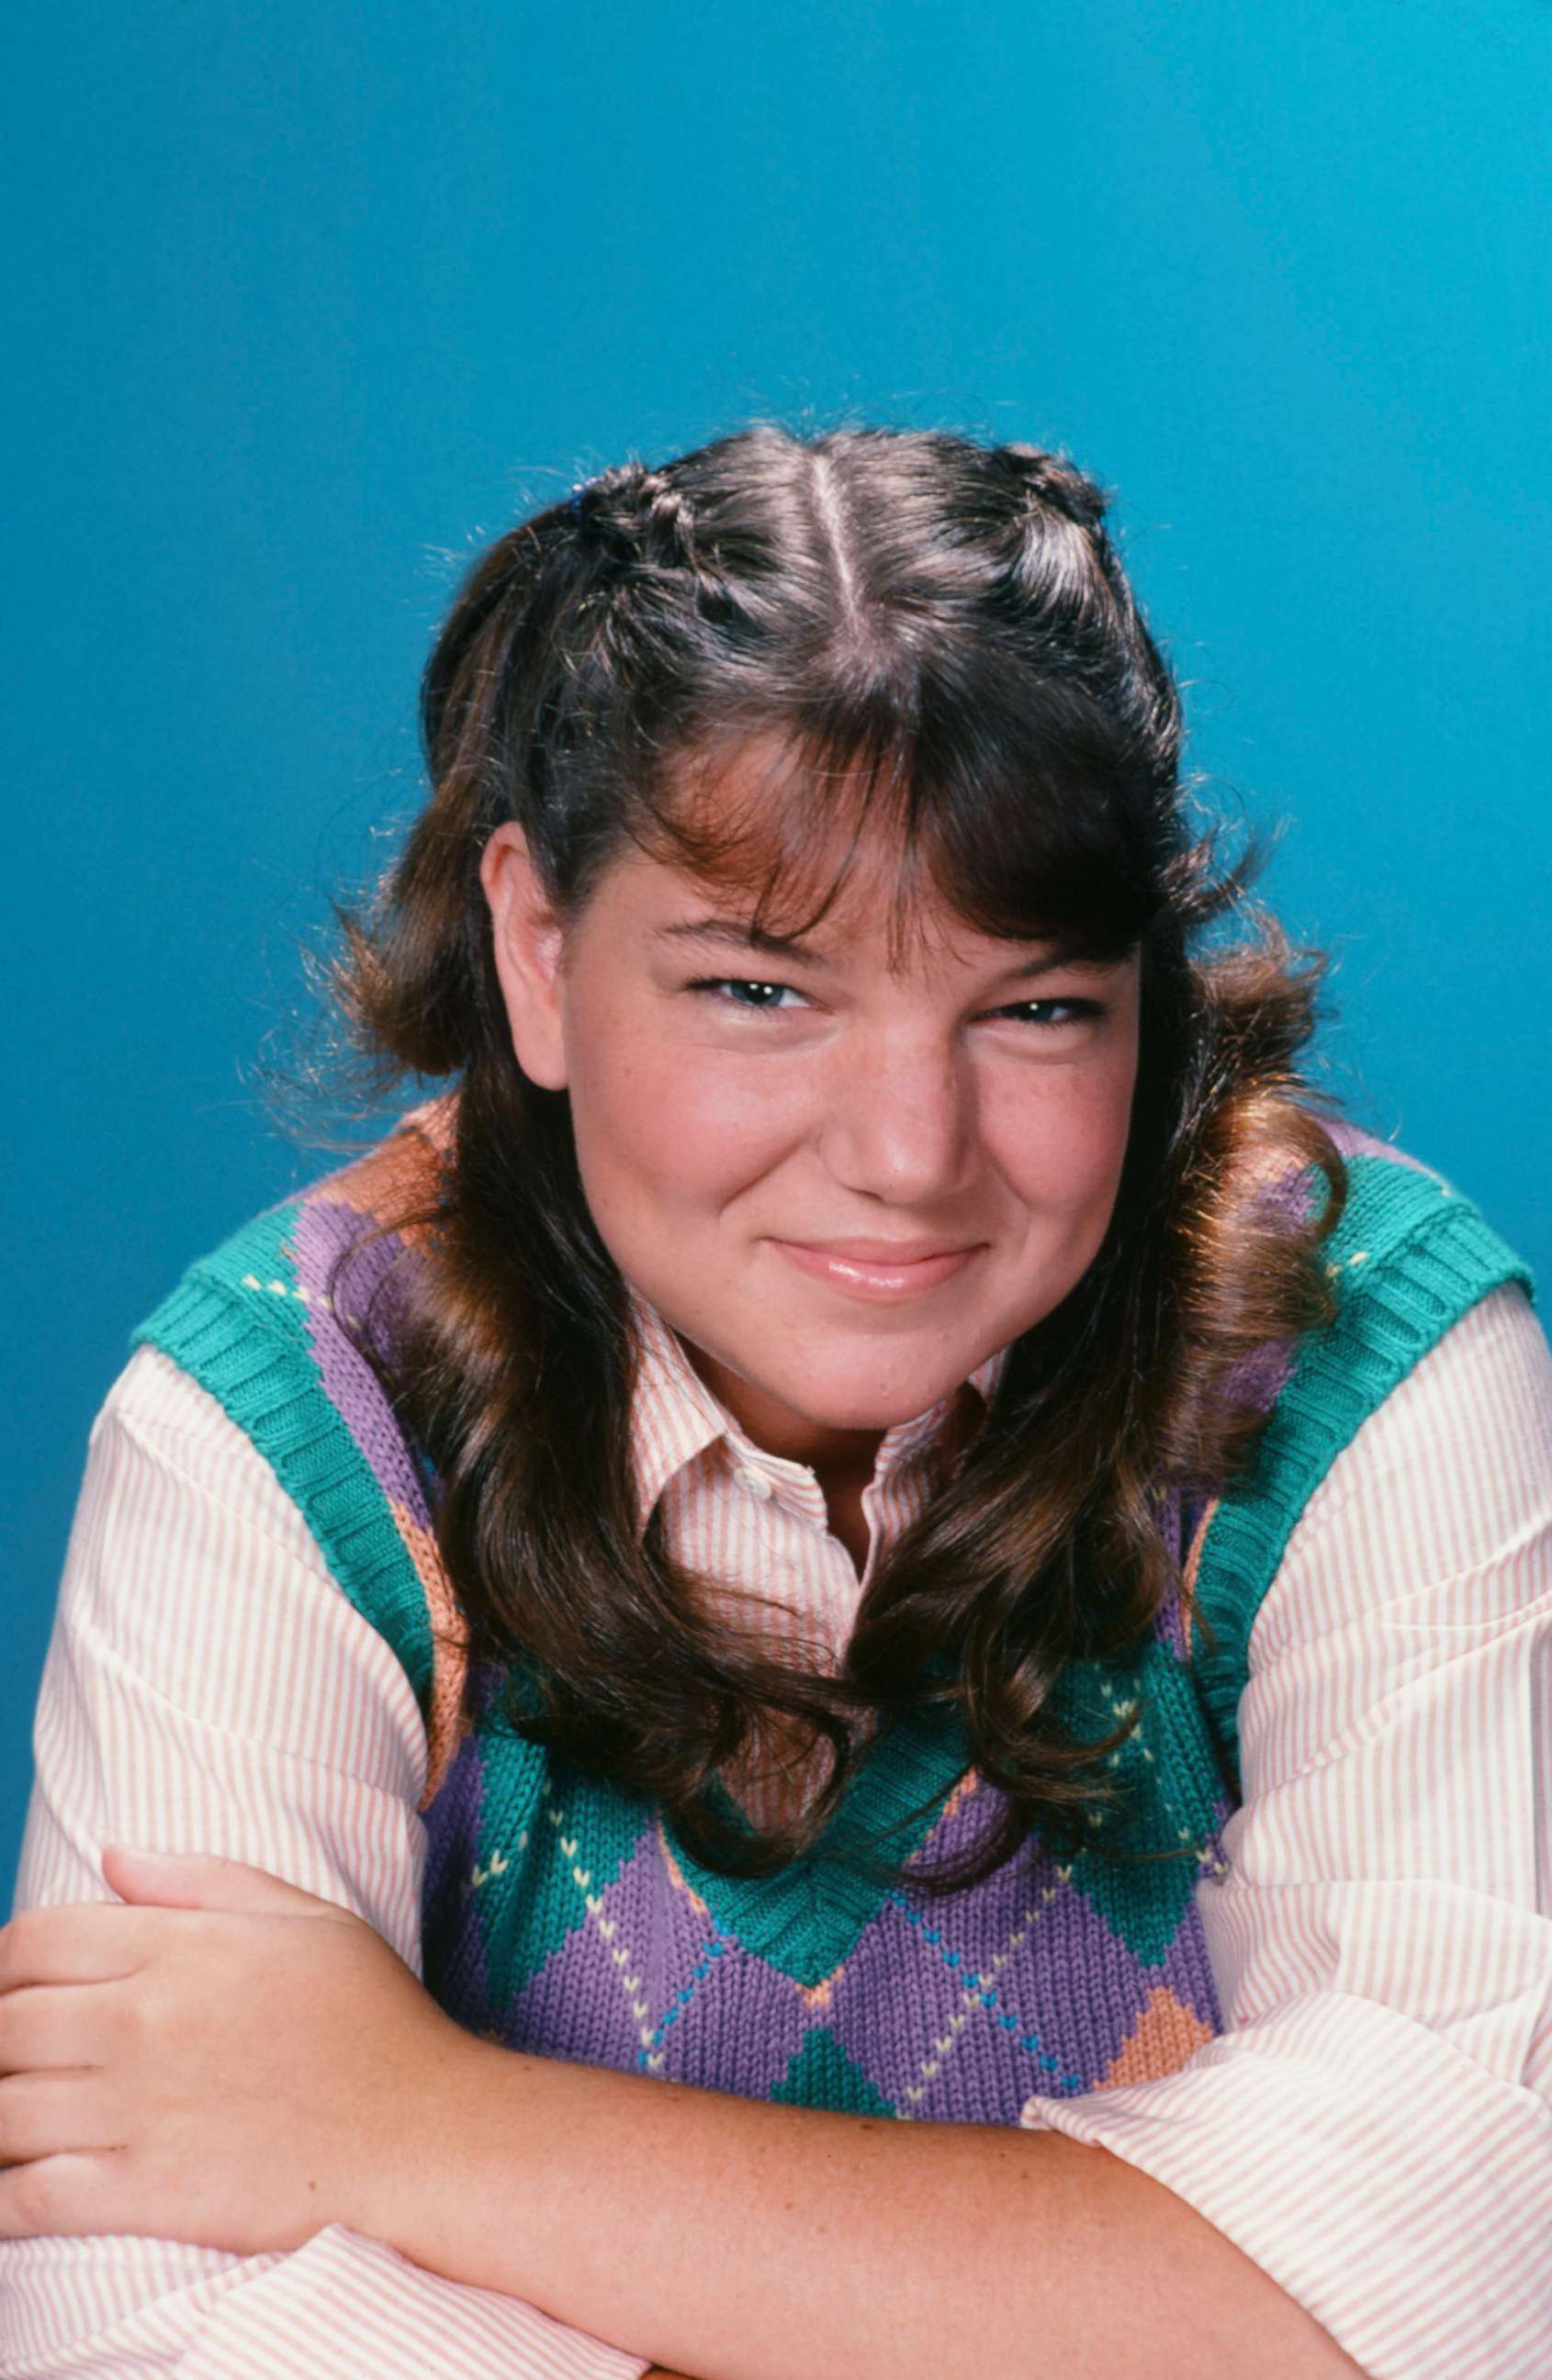 PHOTO: Mindy Cohn as Natalie Green in "The Facts of Life."